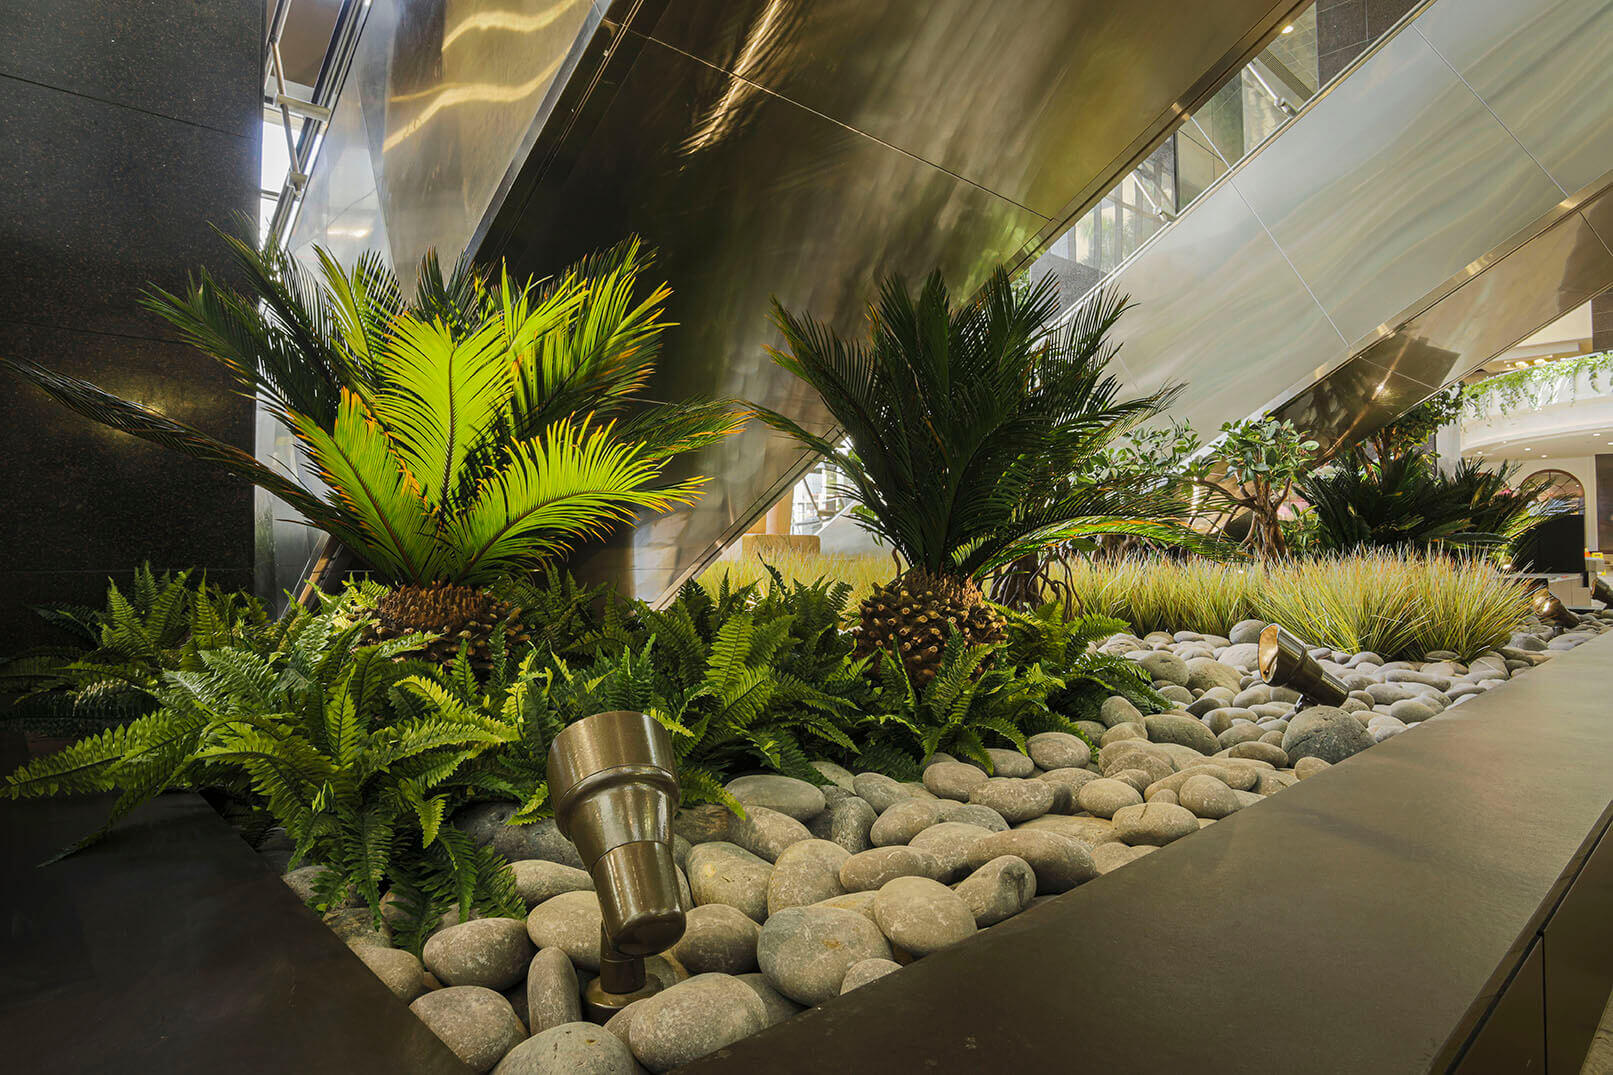 Preserved Sago Palm Trees under the escalators at Datran Business Center